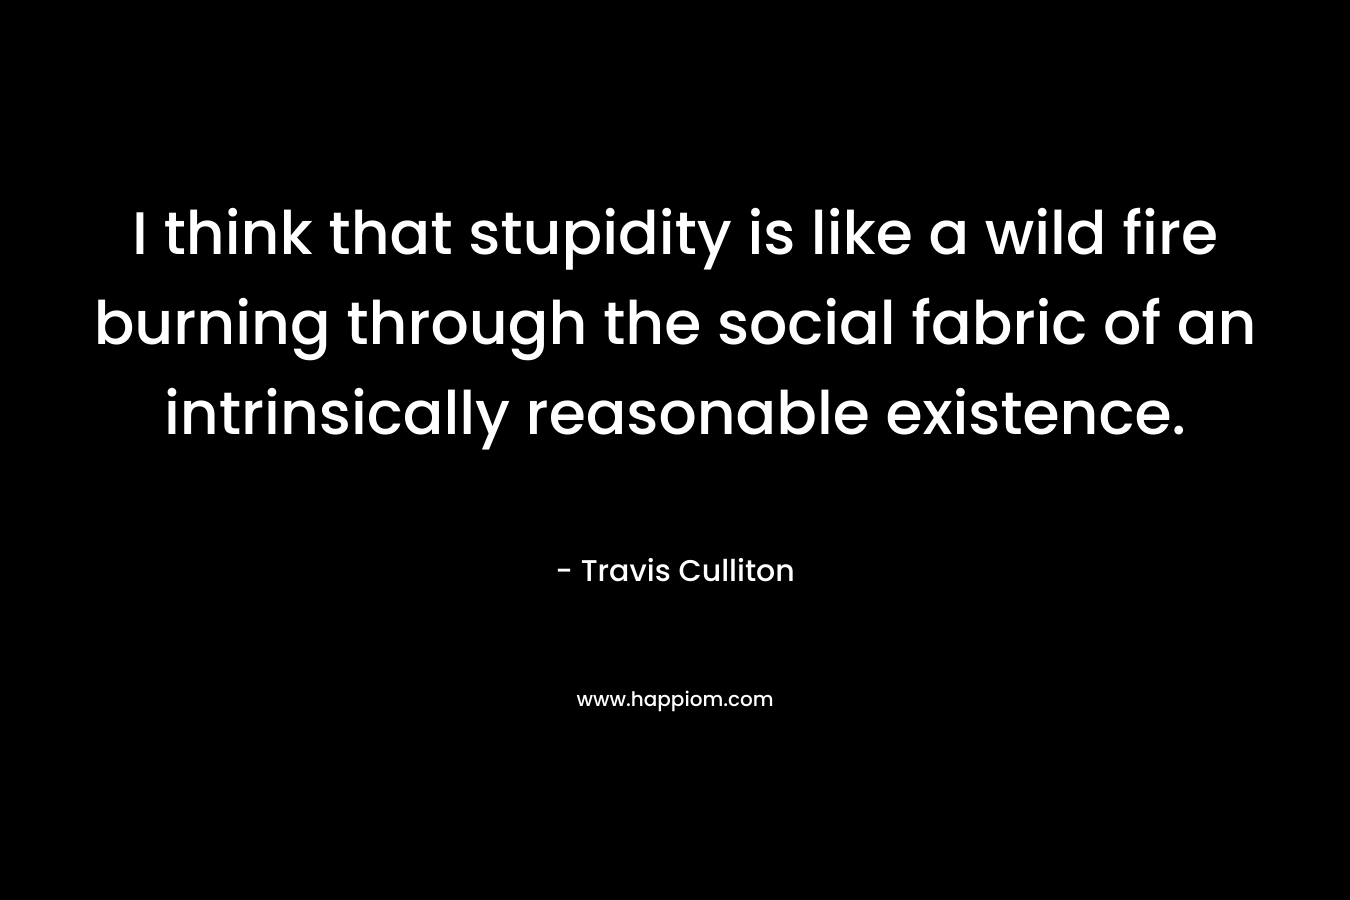 I think that stupidity is like a wild fire burning through the social fabric of an intrinsically reasonable existence.